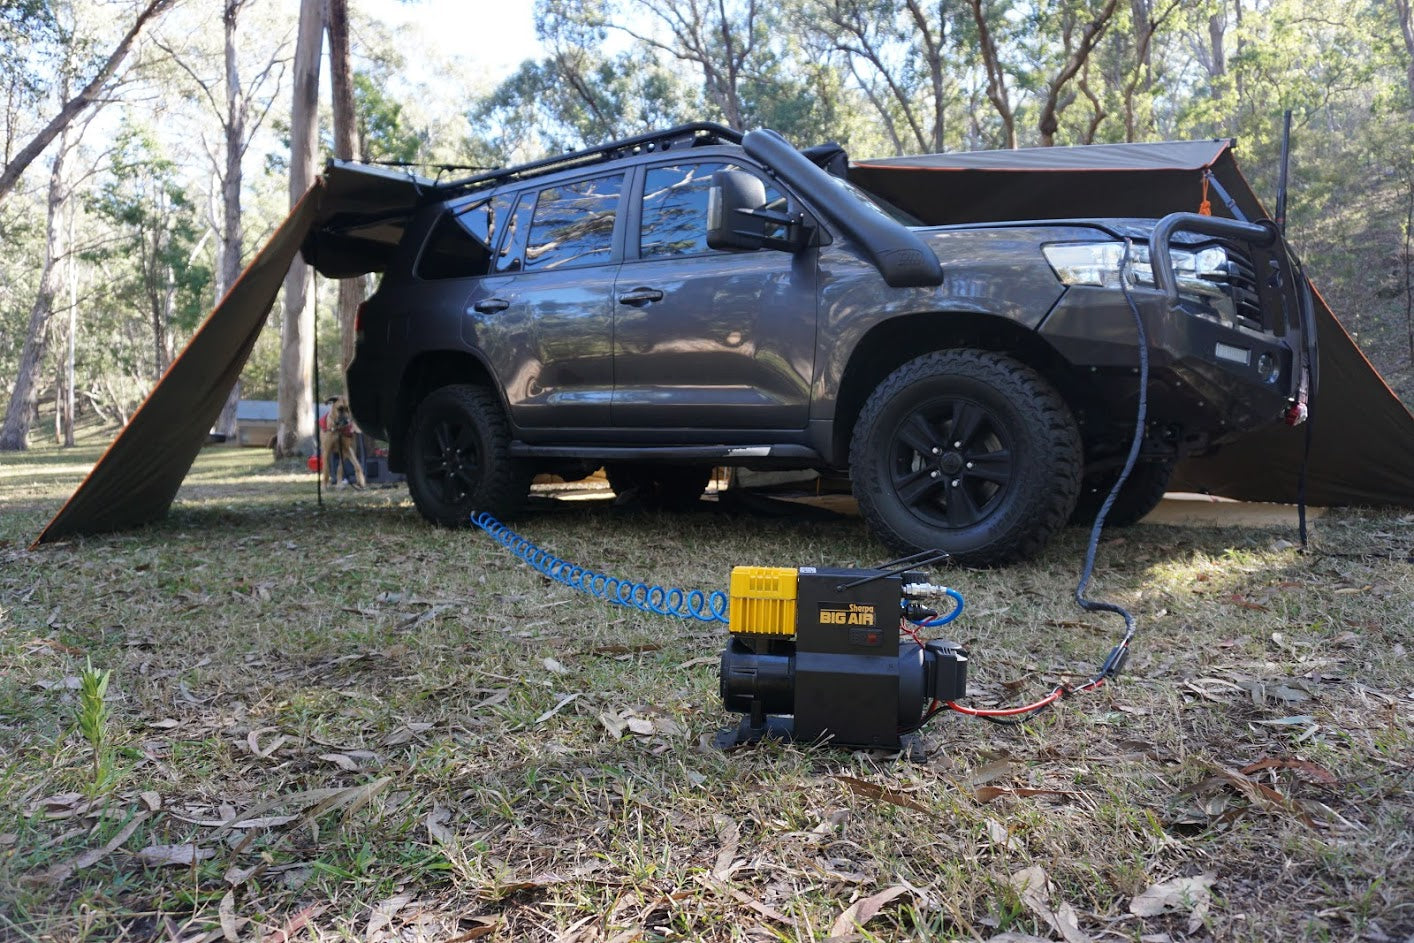 4WD heavy duty air compressor for camping and adventuring